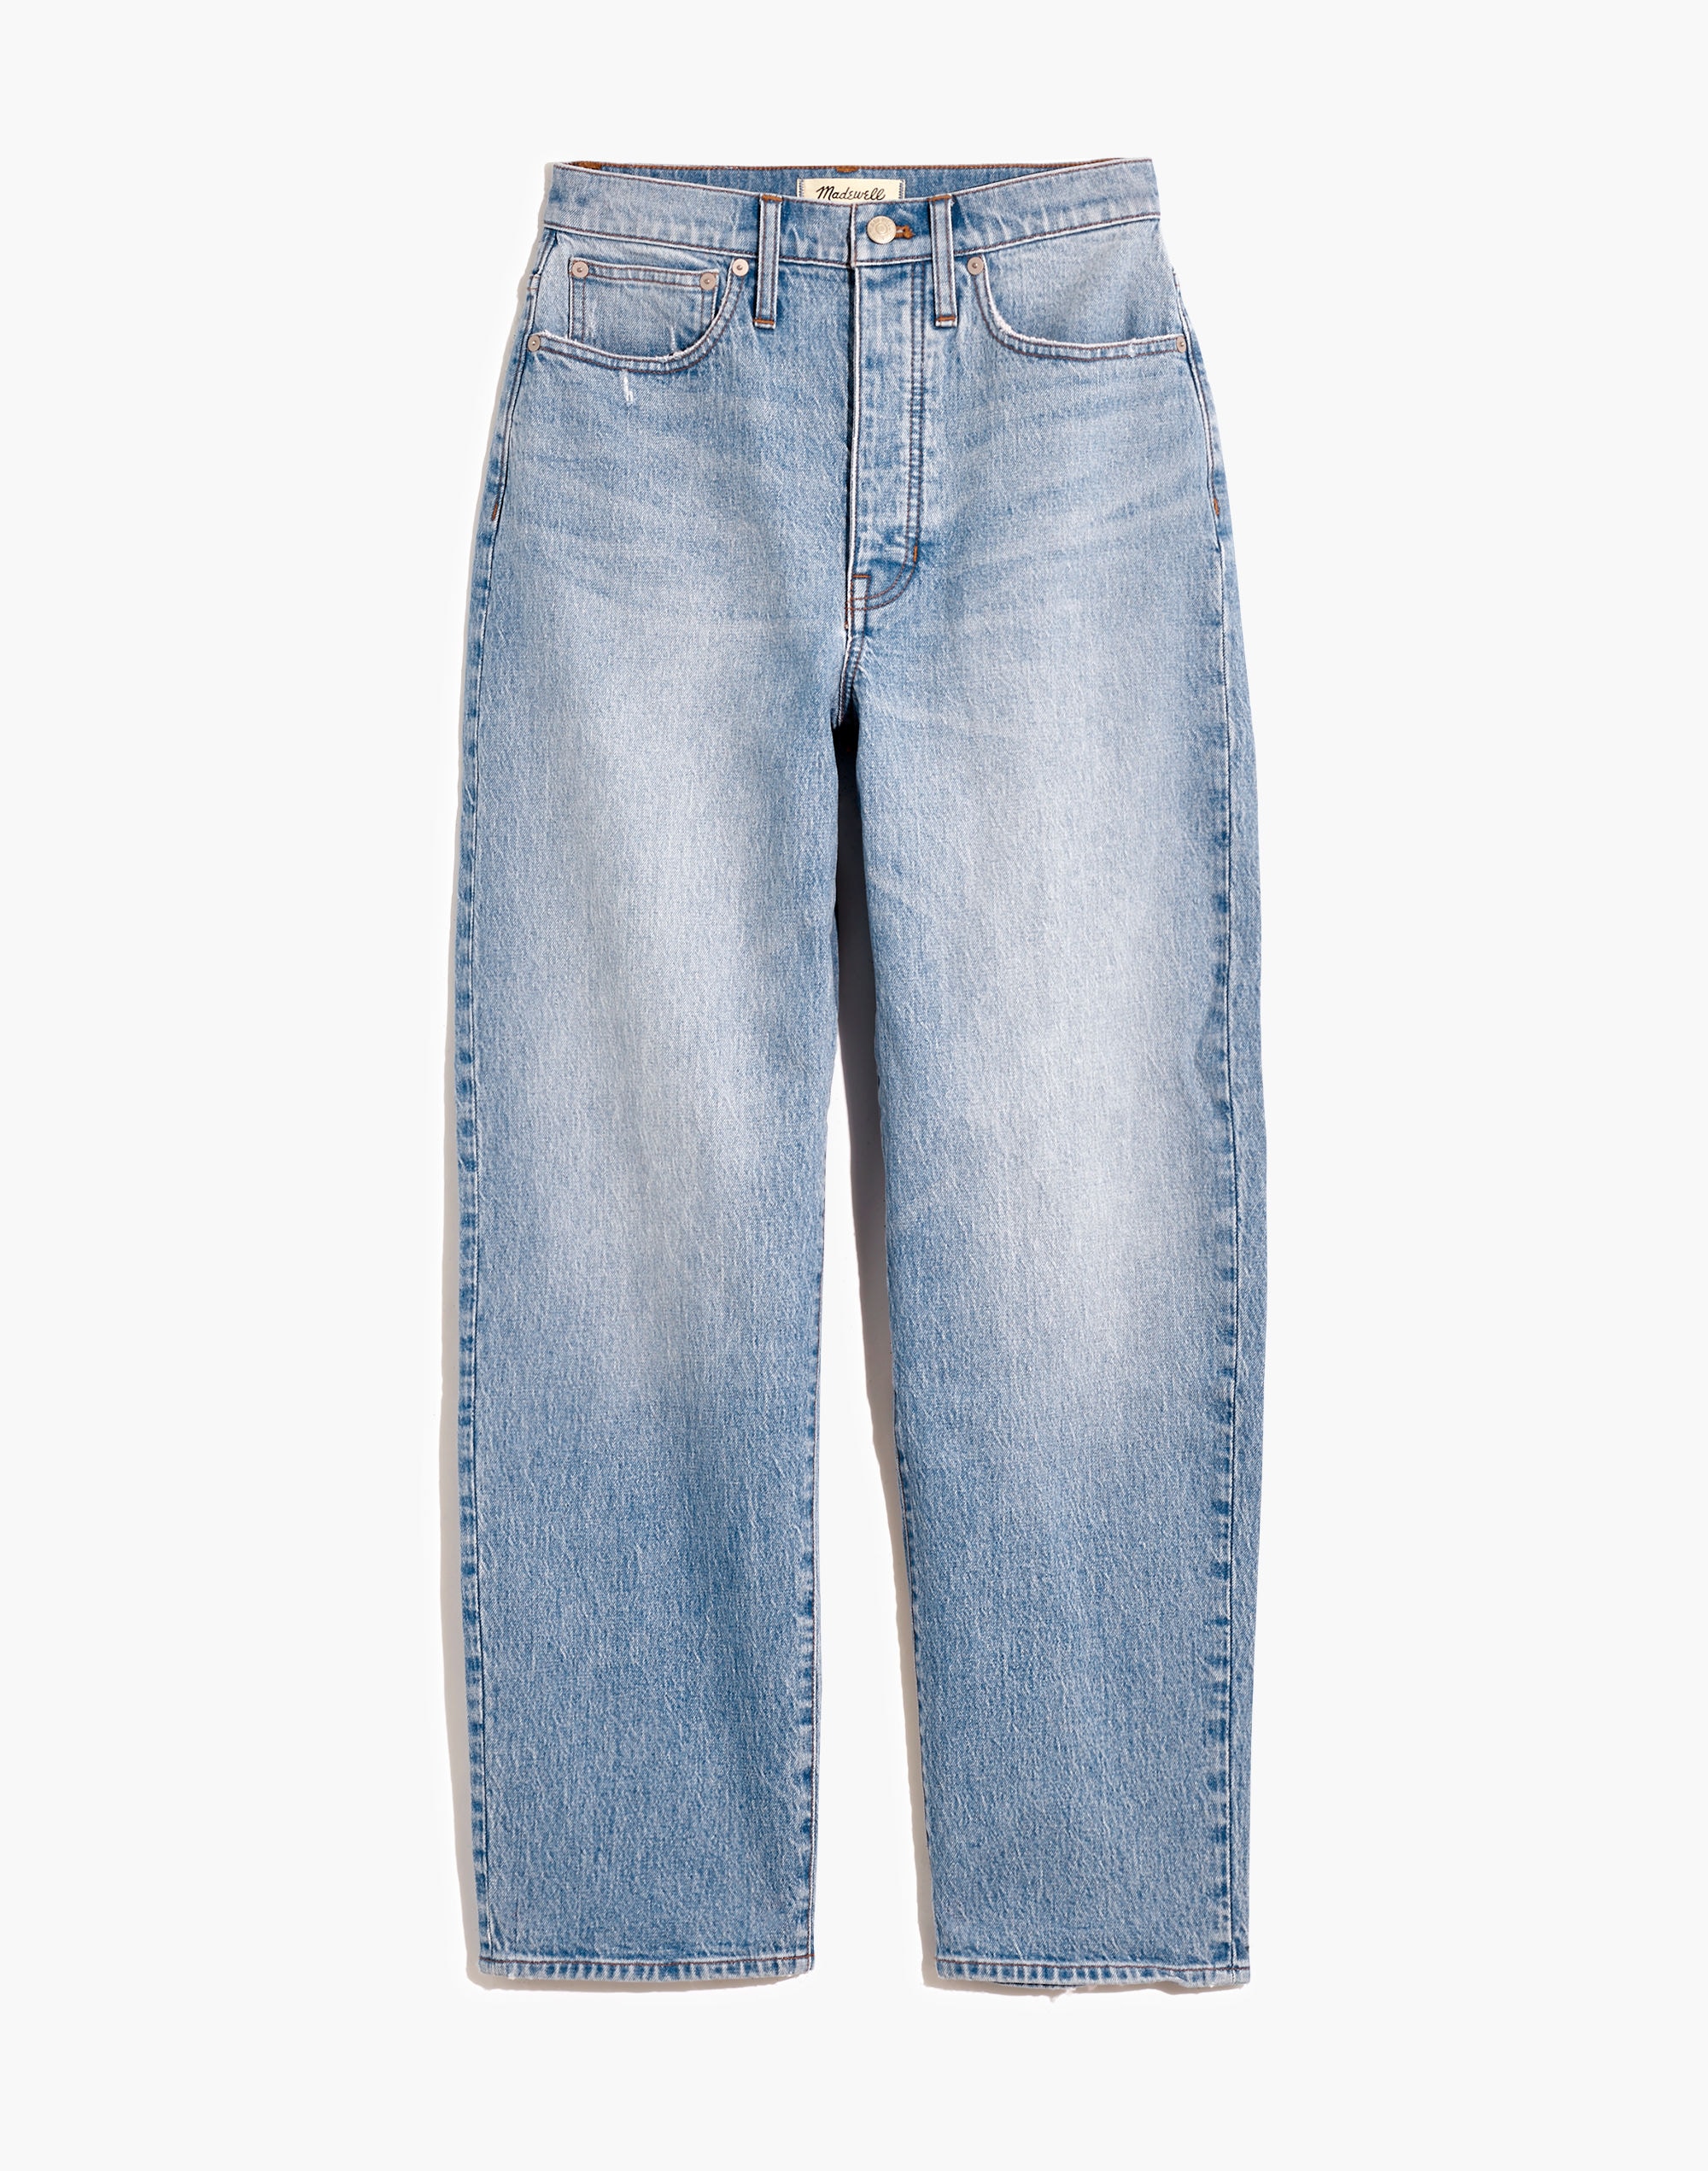 Women's Balloon Jeans in Hewes Wash | Madewell